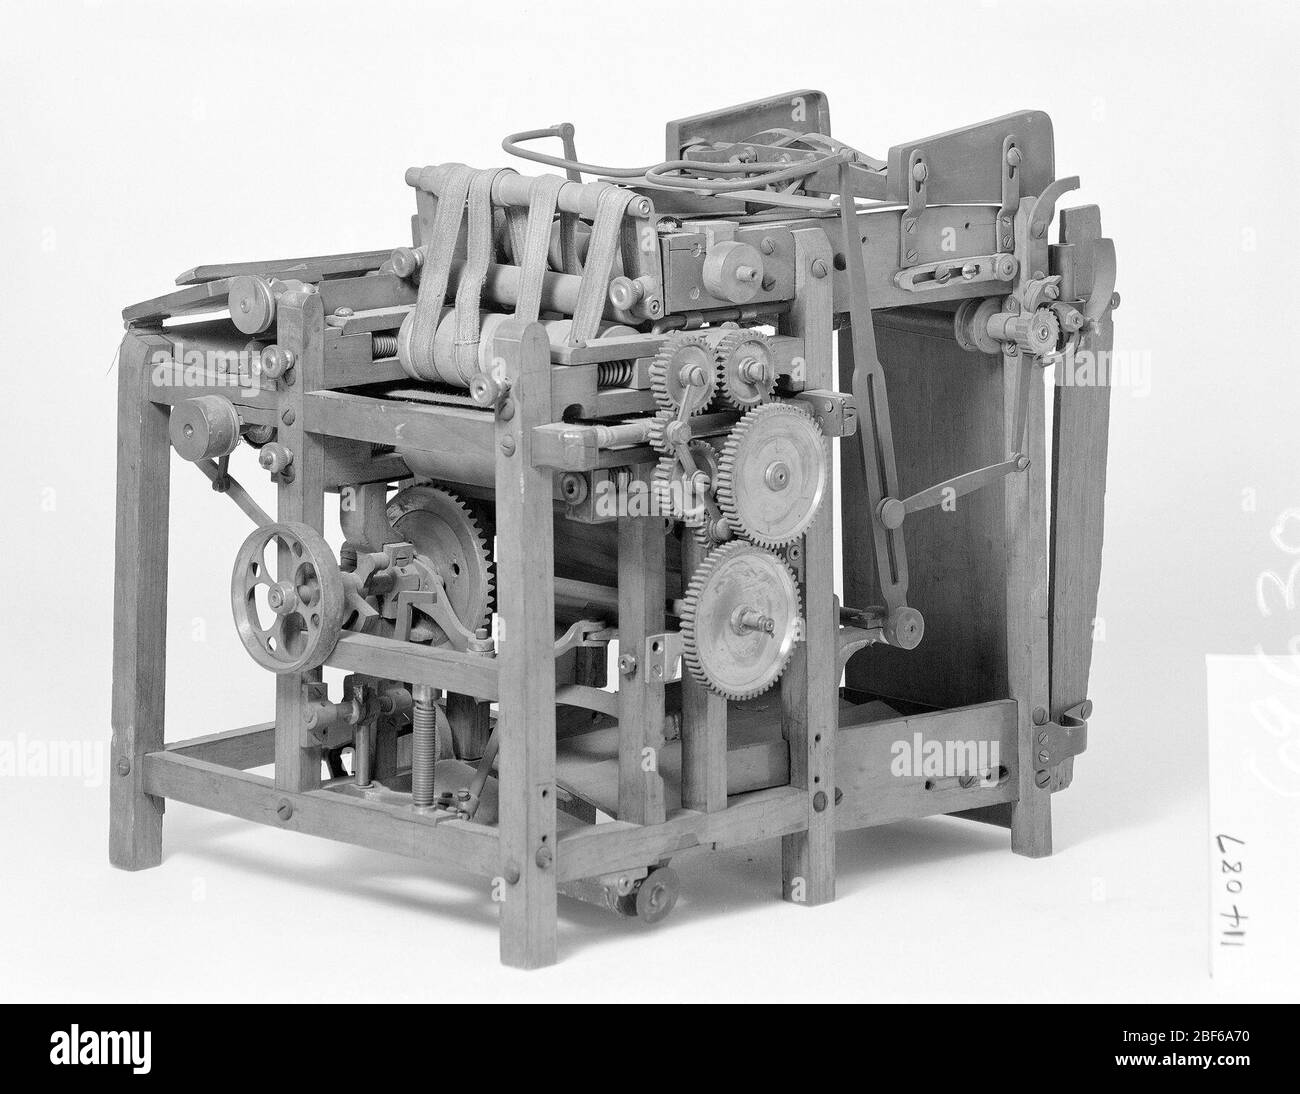 Patent Model of a Sheet Feed Apparatus for Bookbinding. This patent model demonstrates an invention for a sheet-feed apparatus which was granted patent number 114087. Stock Photo